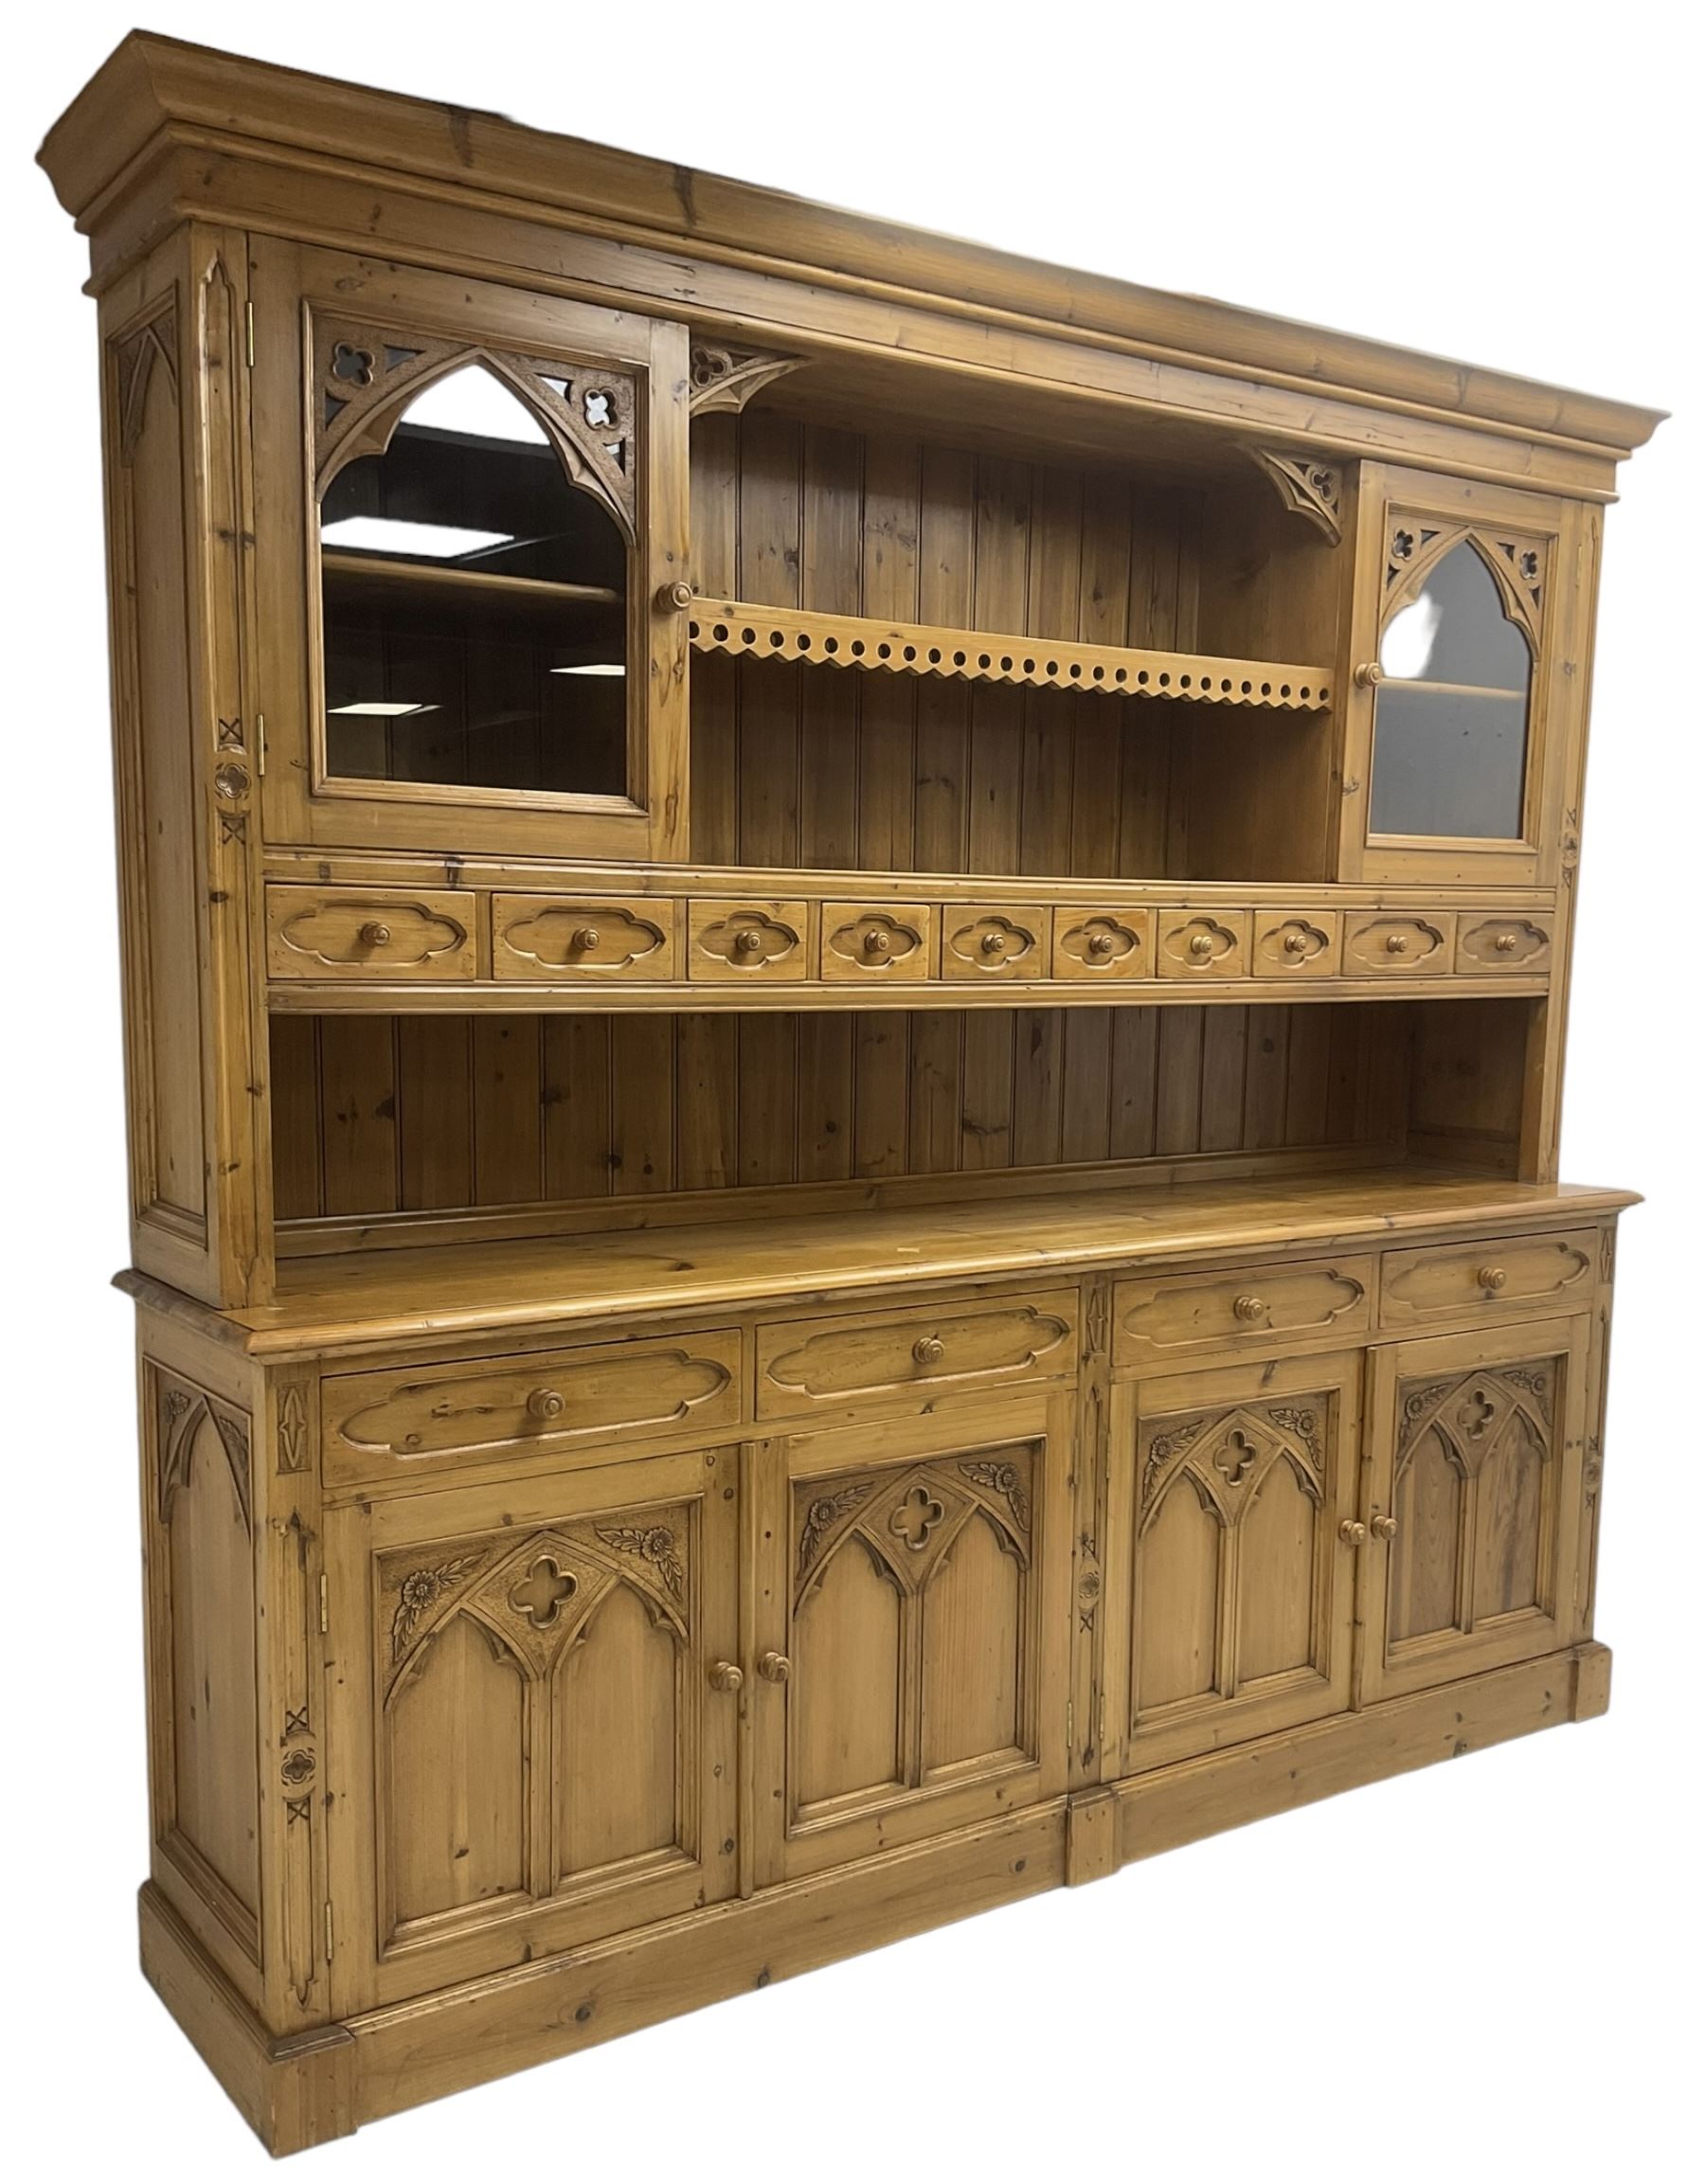 Ecclesiastical Gothic design waxed pine 8’ dresser - Image 7 of 8